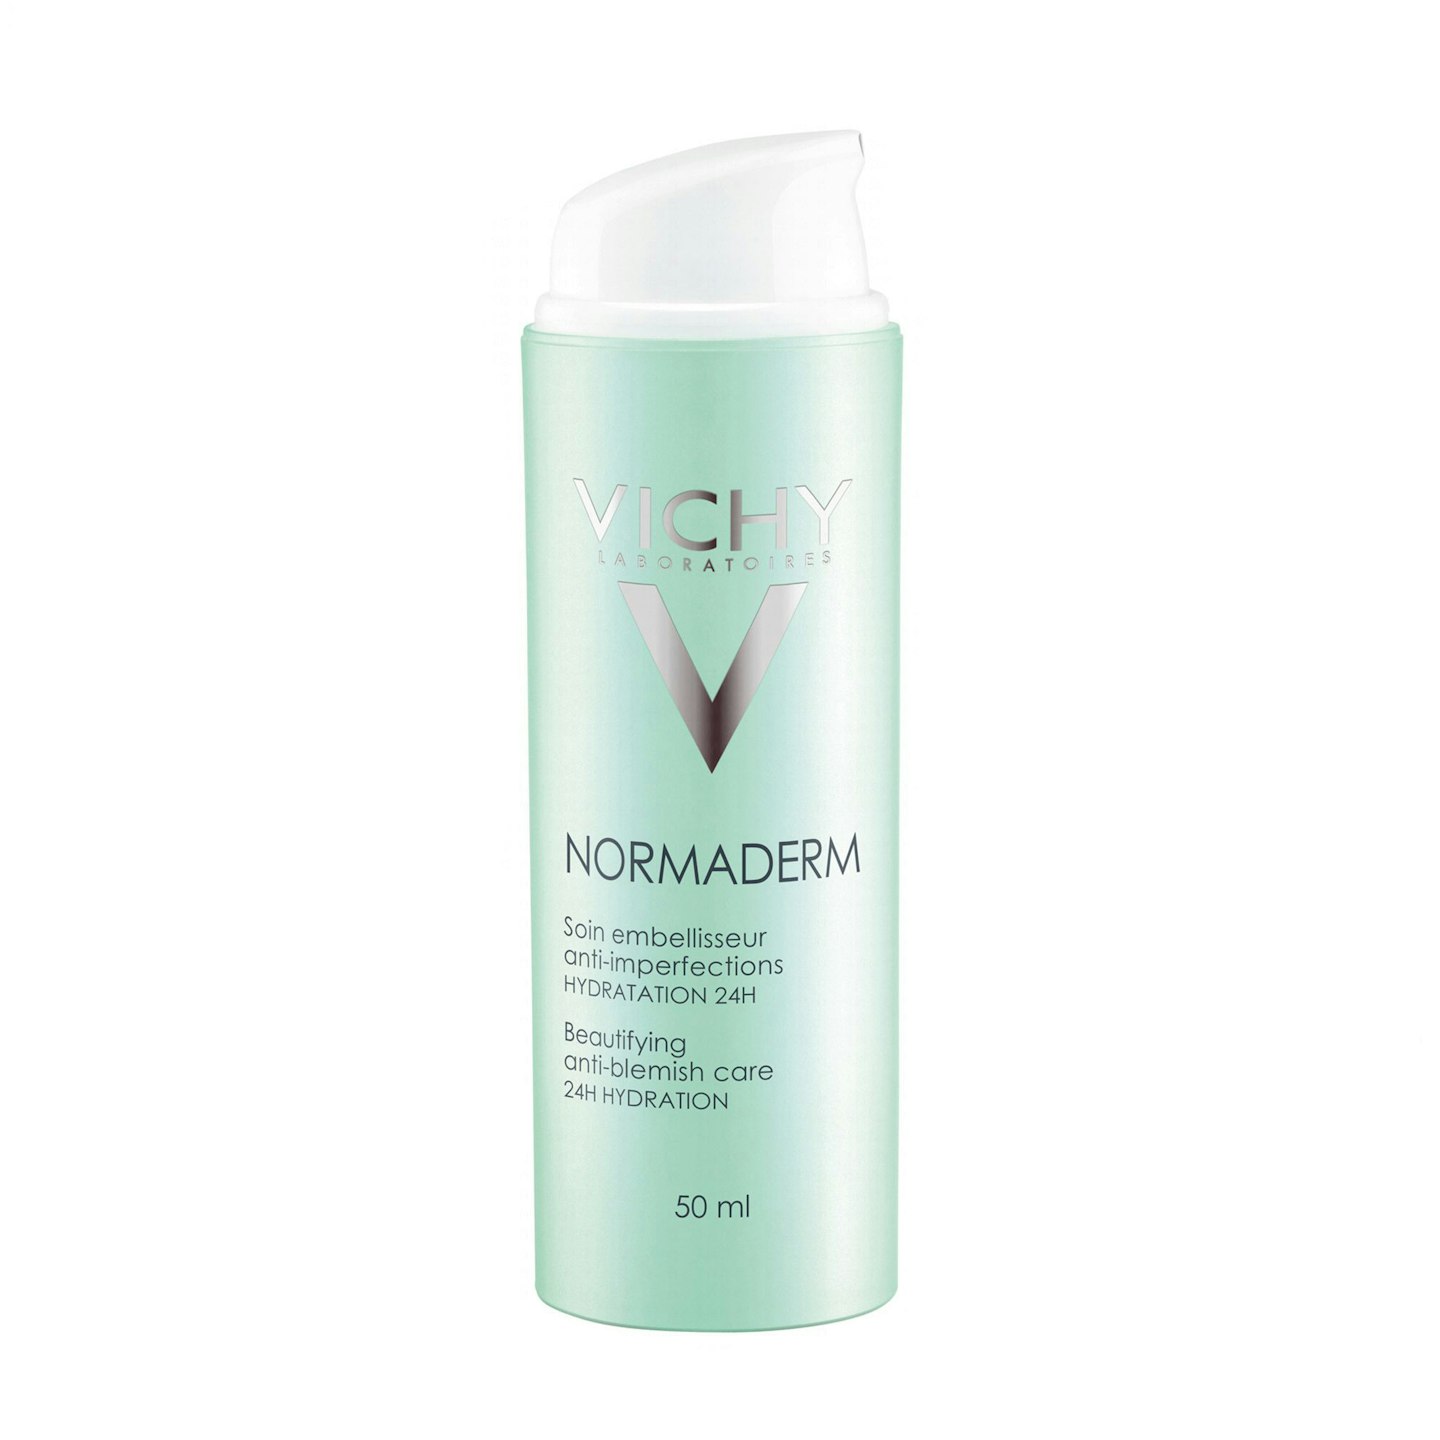 Vichy, Normaderm Beautifying Anti-Blemish Care, £15